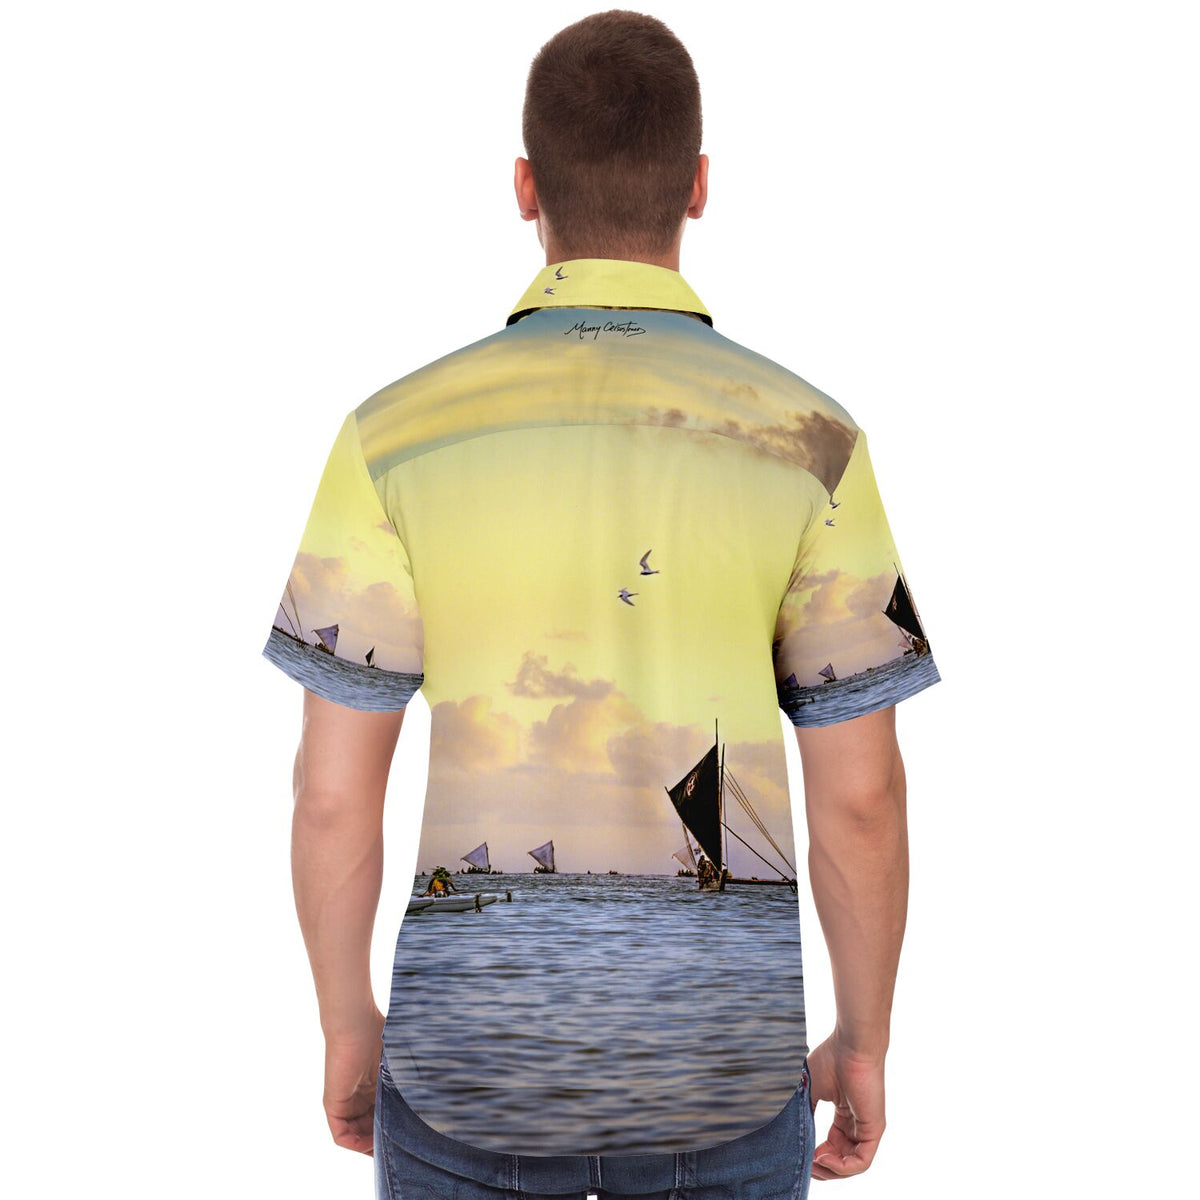 Traditional Canoe Welcome FestPac 2016 Short Sleeve Button Down Shirt